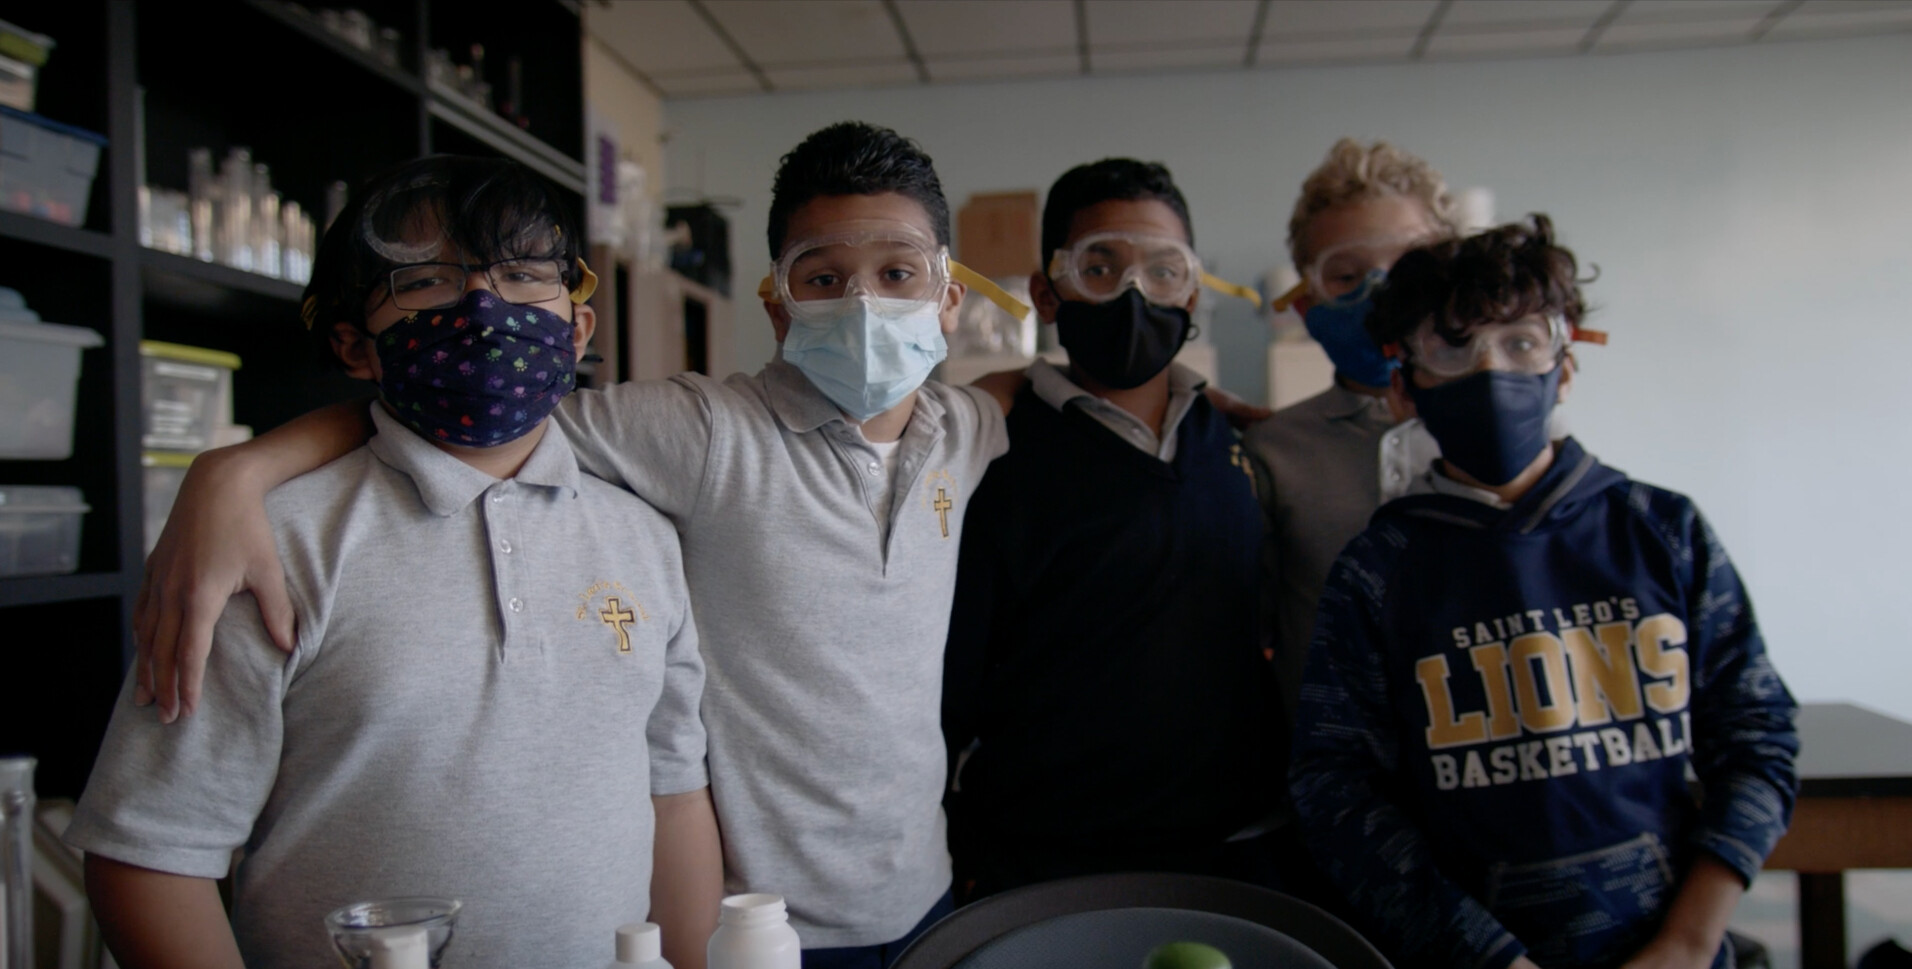 Catholic schools in the Archdiocese of Newark have provided stability and consistency for students and their families during a global pandemic that has upended everyday life. Photo/Archdiocese of Newark